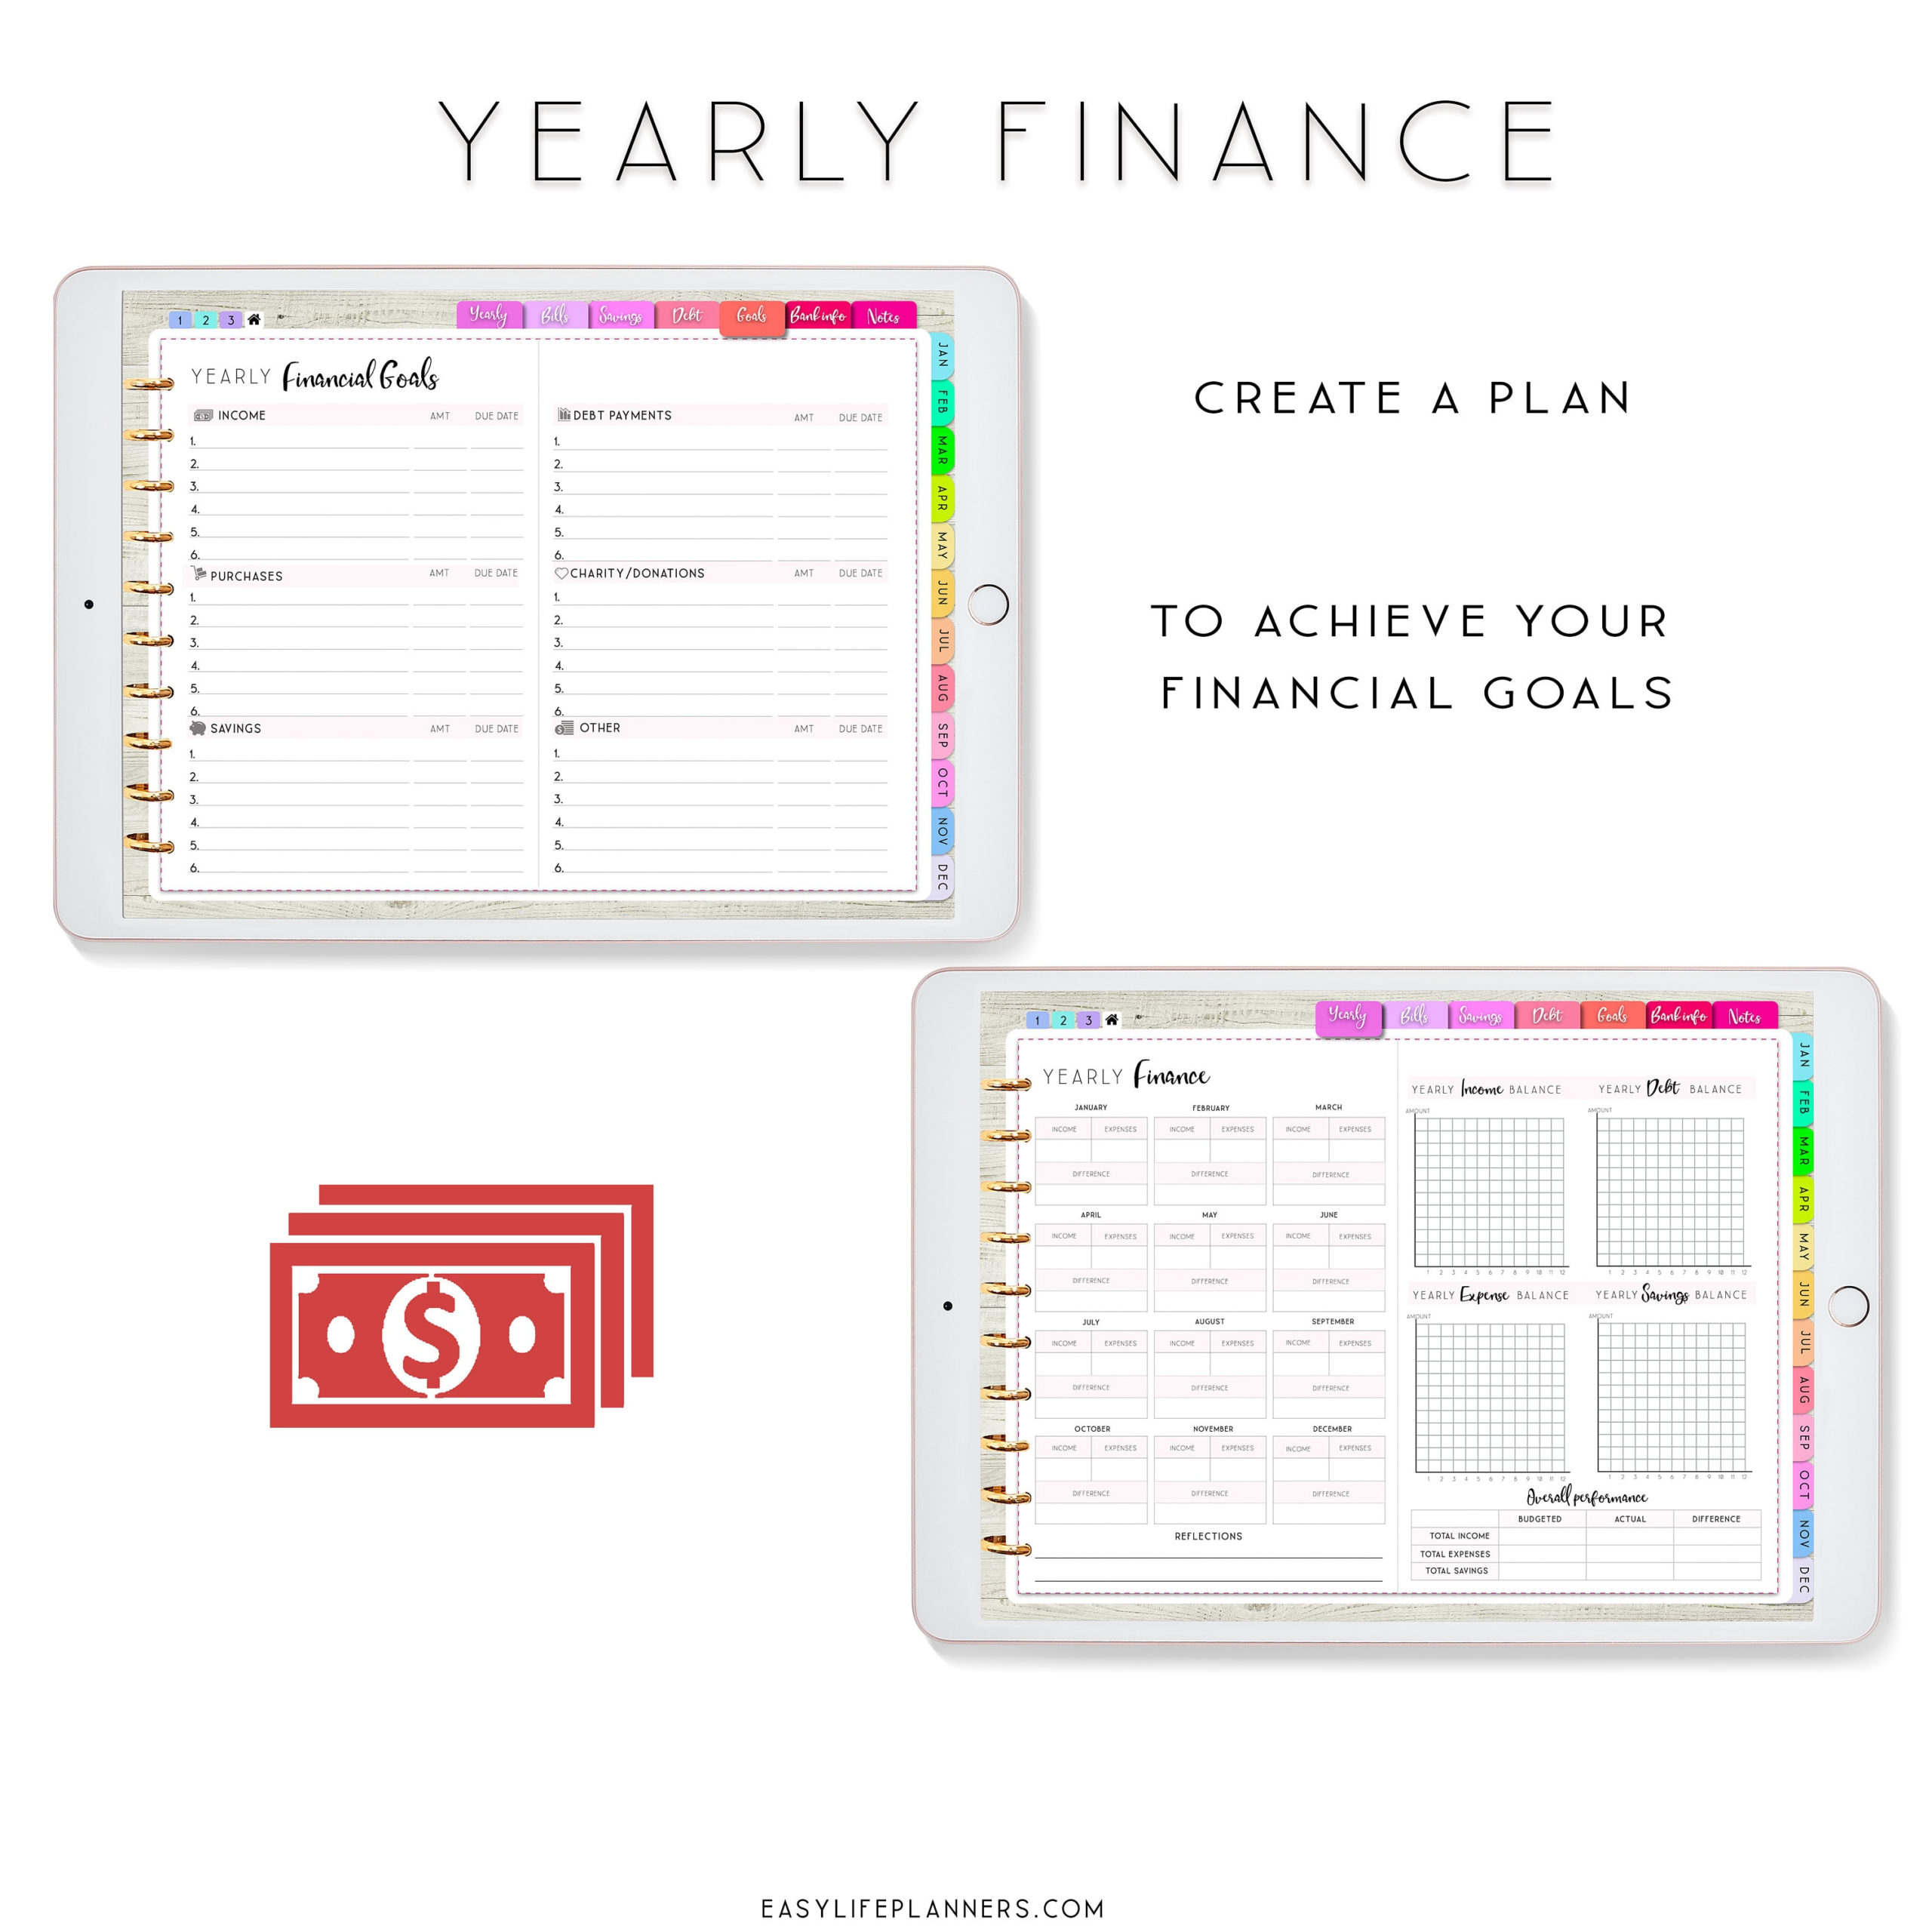 Digital Planner, Goodnotes Planner, Ipad Planner with regard to New Budget Planner Template Goodnotes